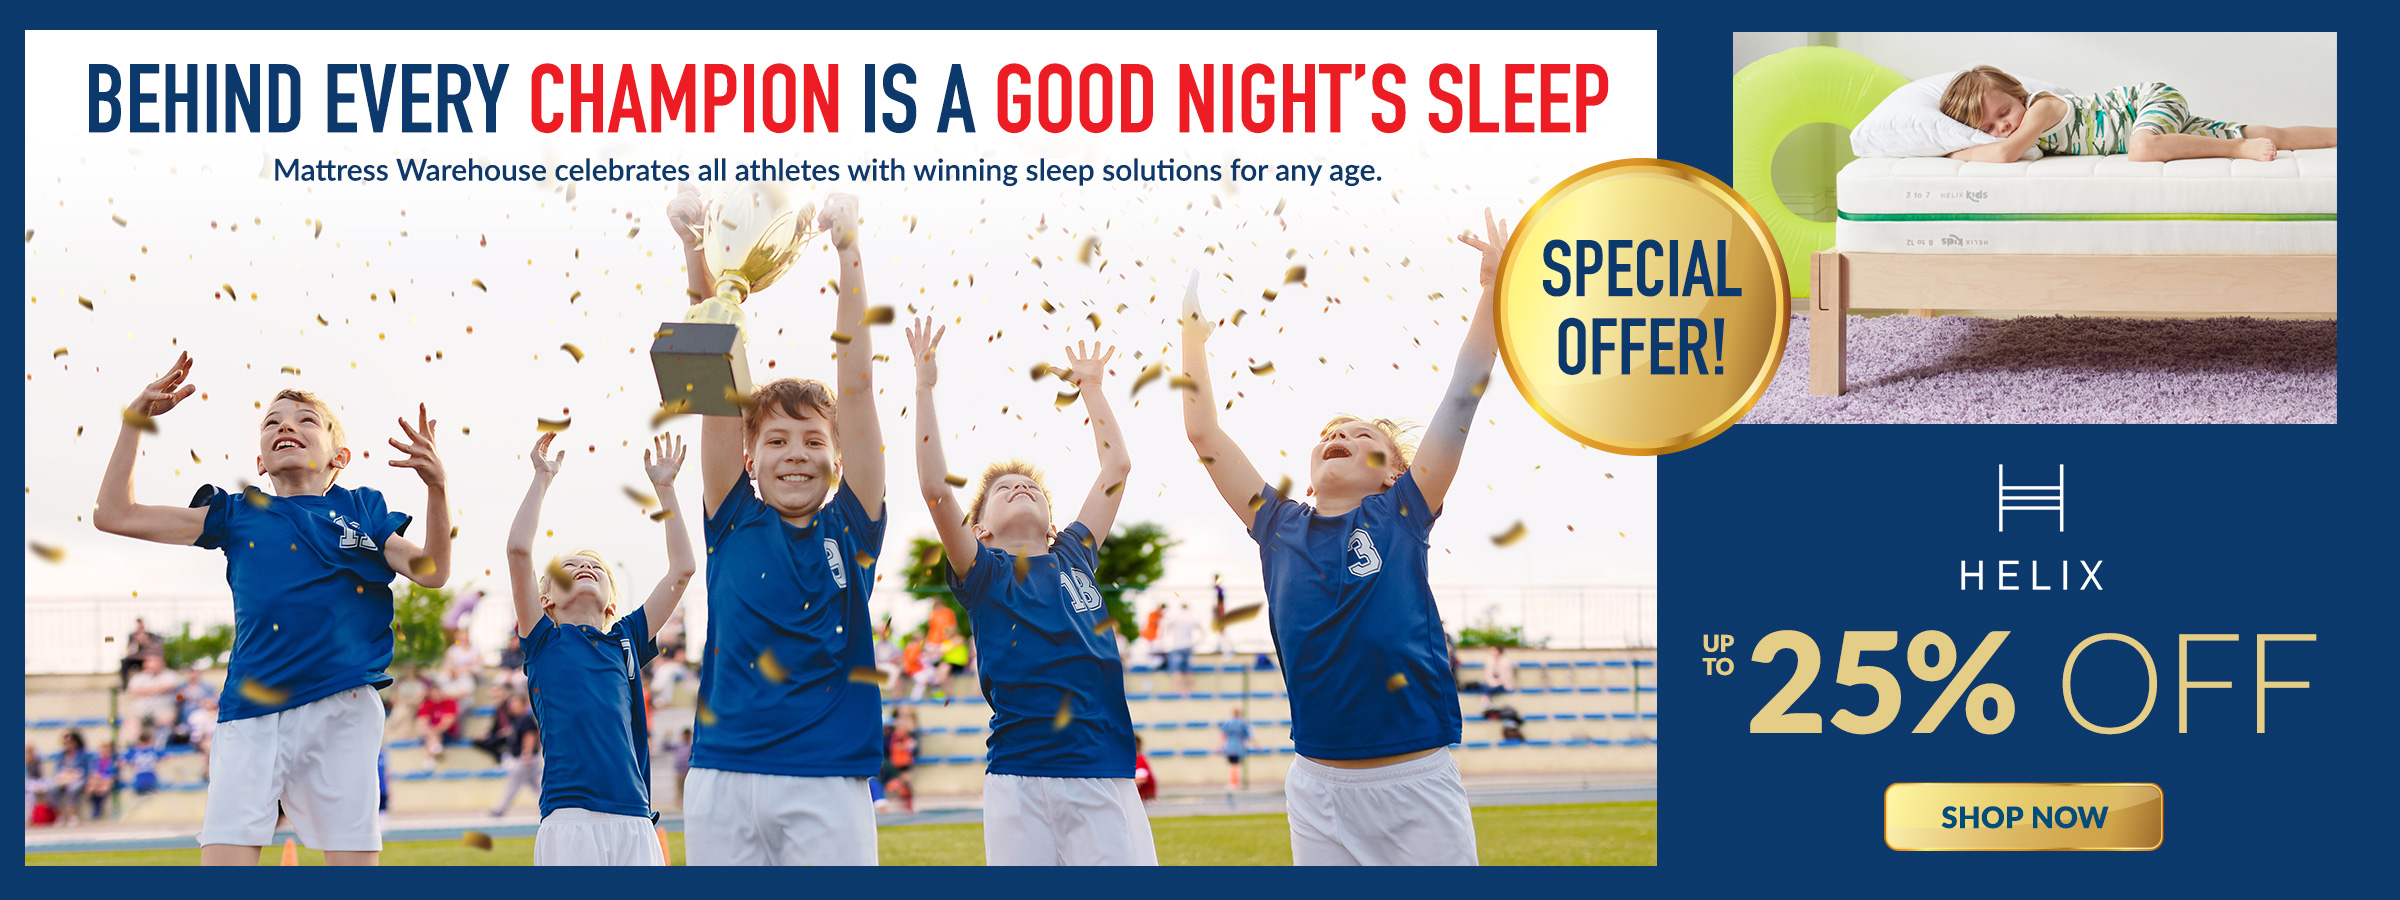 Behind every champion is a good night's sleep. Save up to 25% off Helix